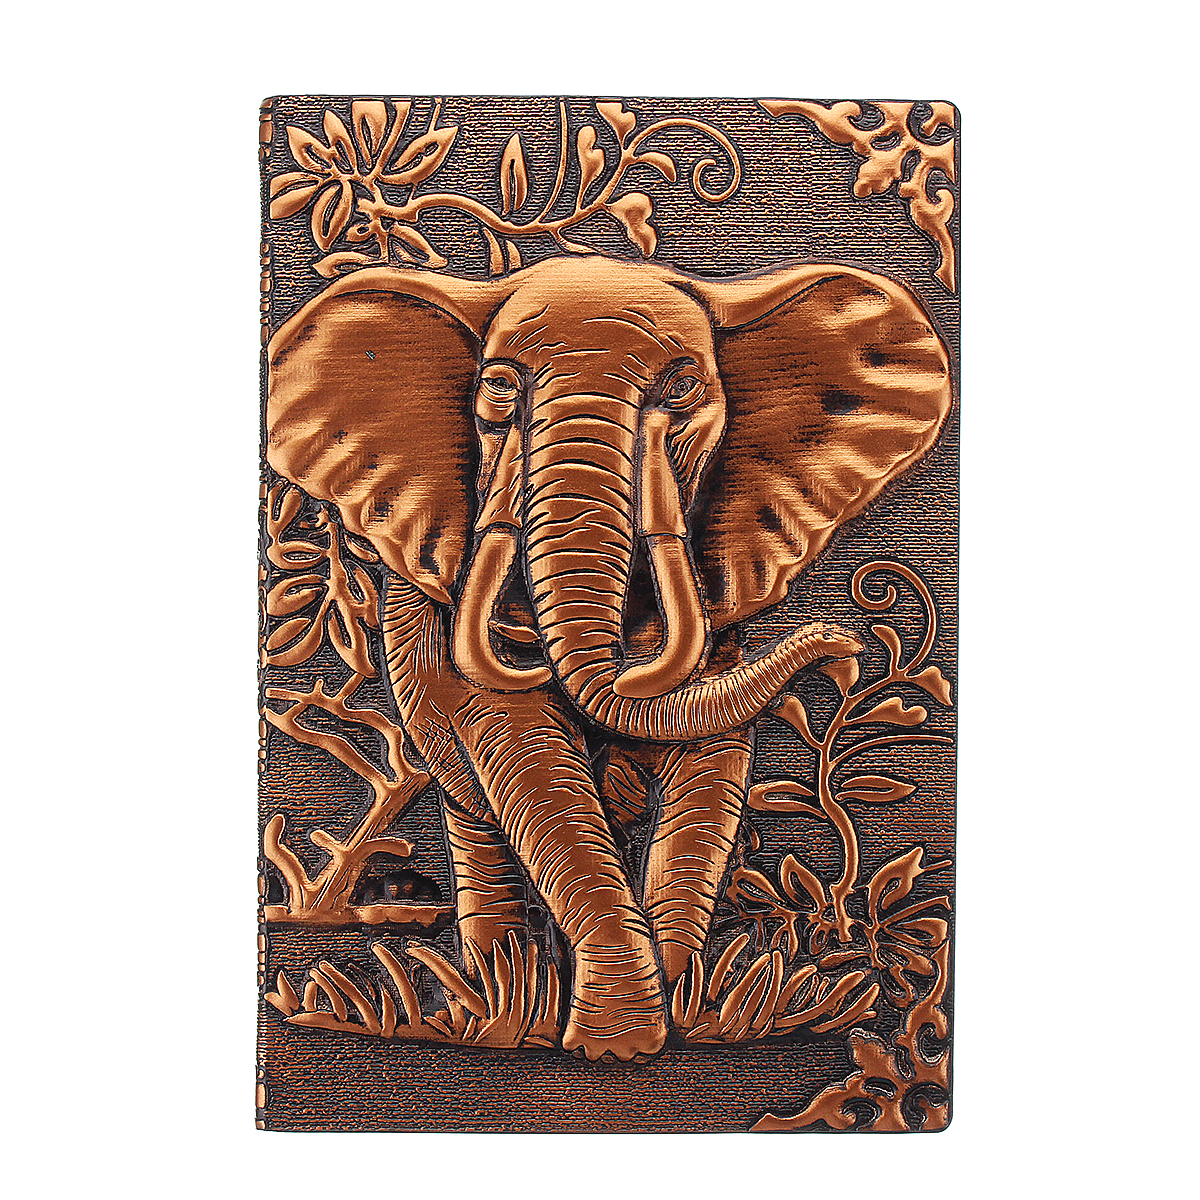 European-elephant-relief-retro-notebook-gift-book-PU-travel-gift-8yue-1631372-1